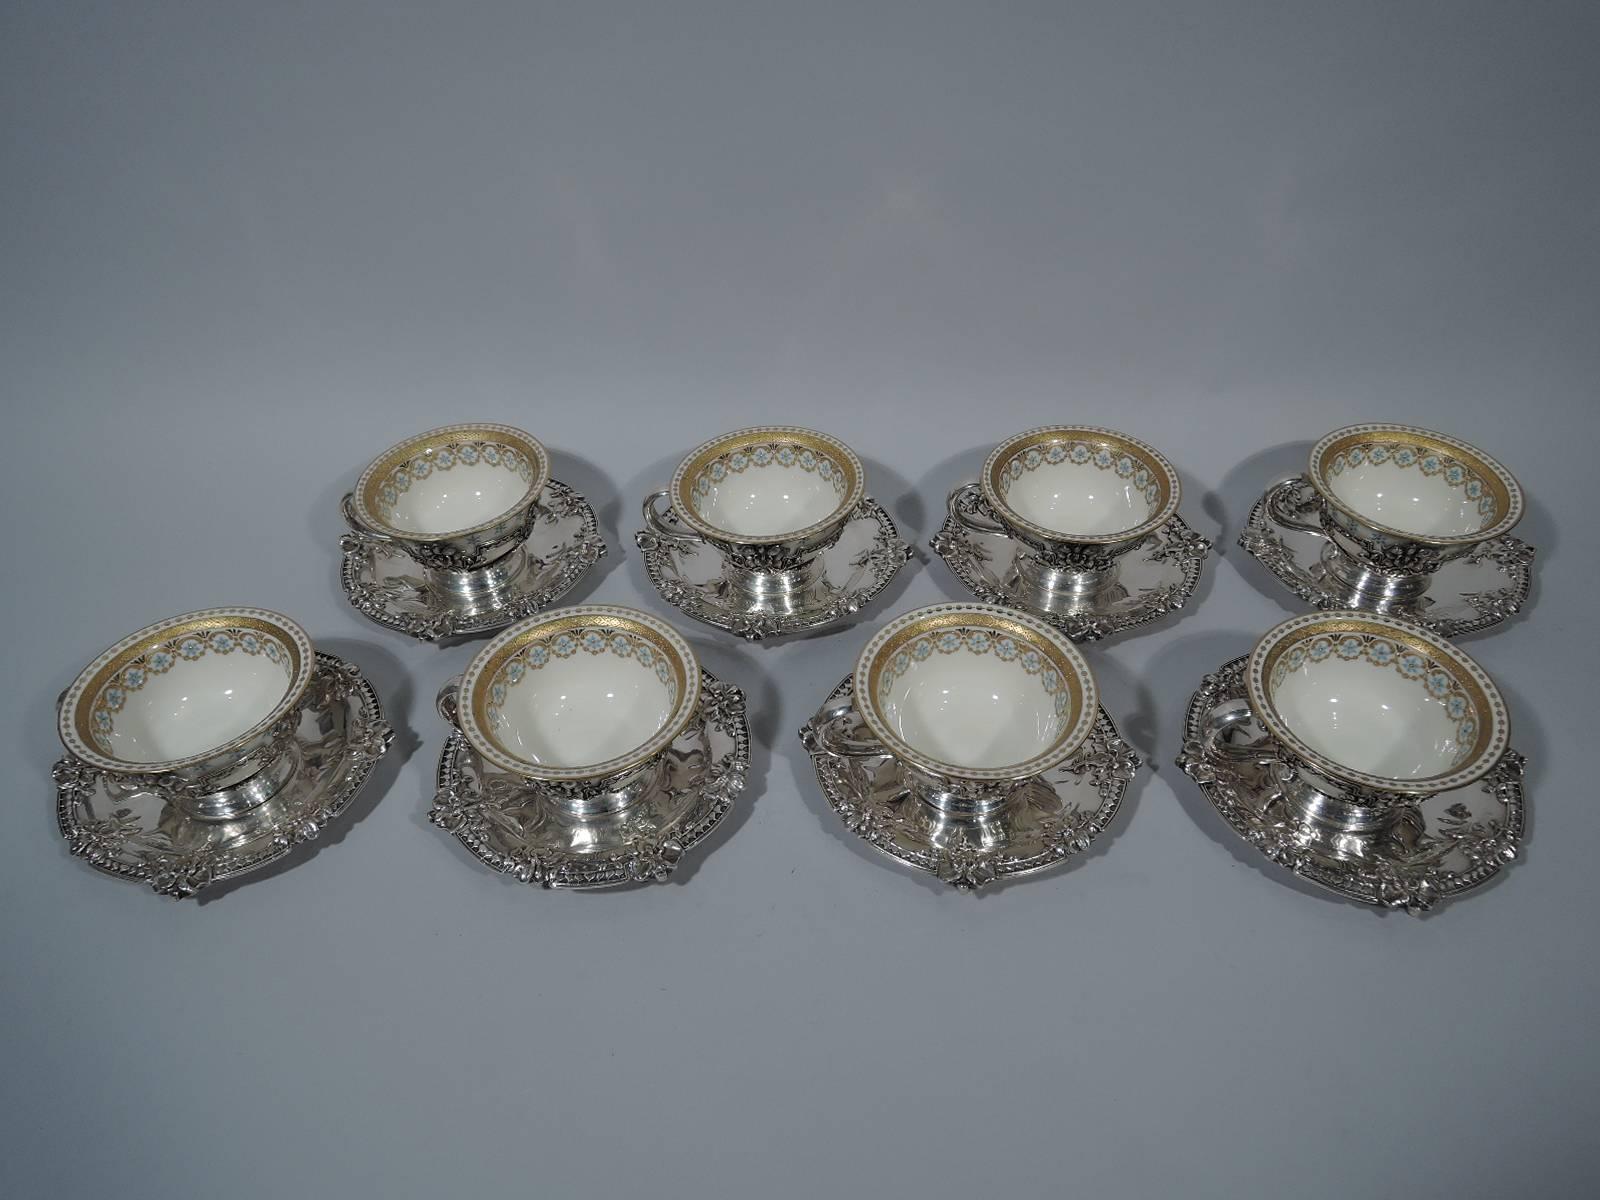 Set of 8 Art Nouveau sterling silver coffee holders and saucers with 8 bone china liners. The holders and saucers were made by Tiffany & Co. in New York, circa 1910. The liners were made by Lenox in Trenton, New Jersey for Tiffany & Co.
The